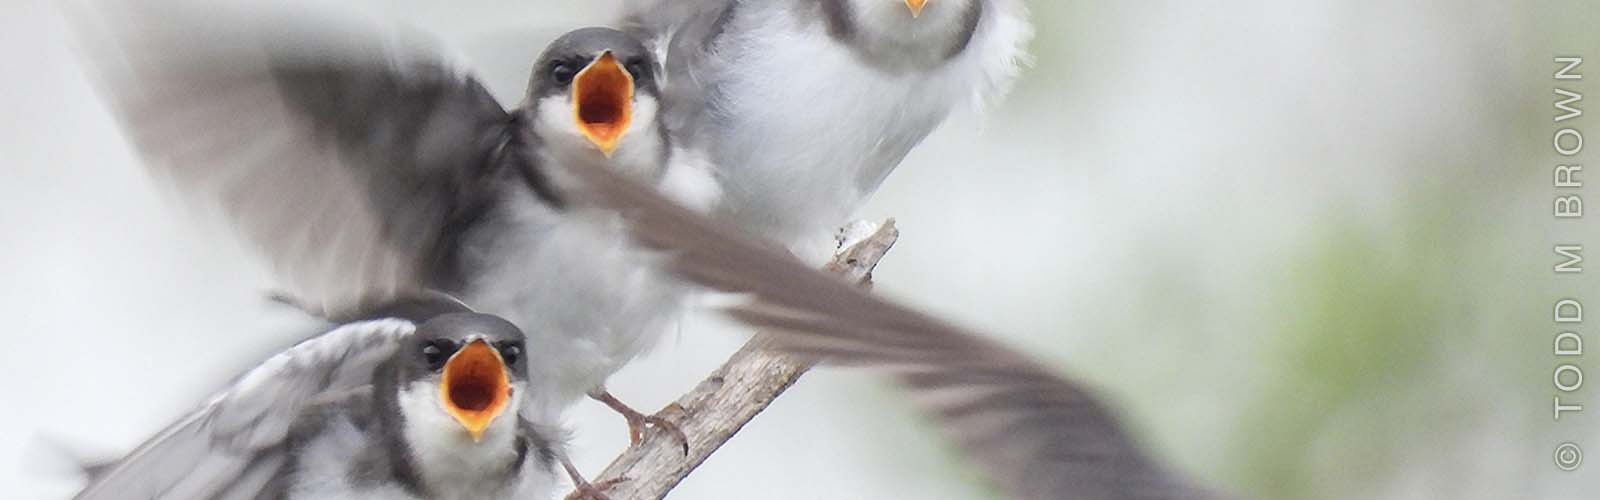 close up of flying grey and white birds with wide open orange mouths